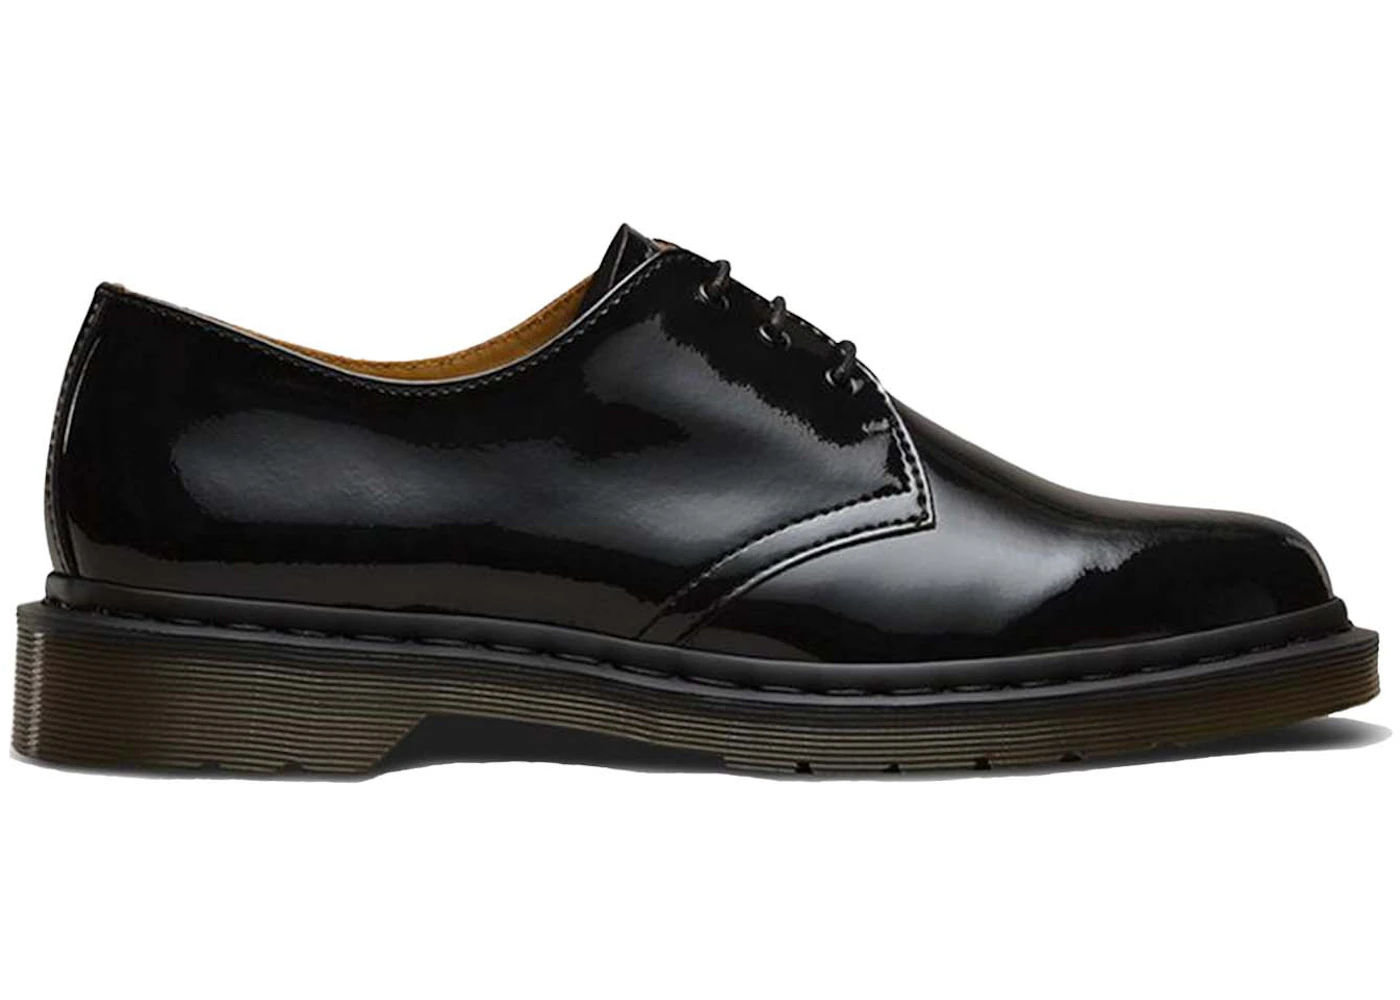 Dr. Martens 1461 Oxford Beams Patent Leather Black - 21713001 - Us